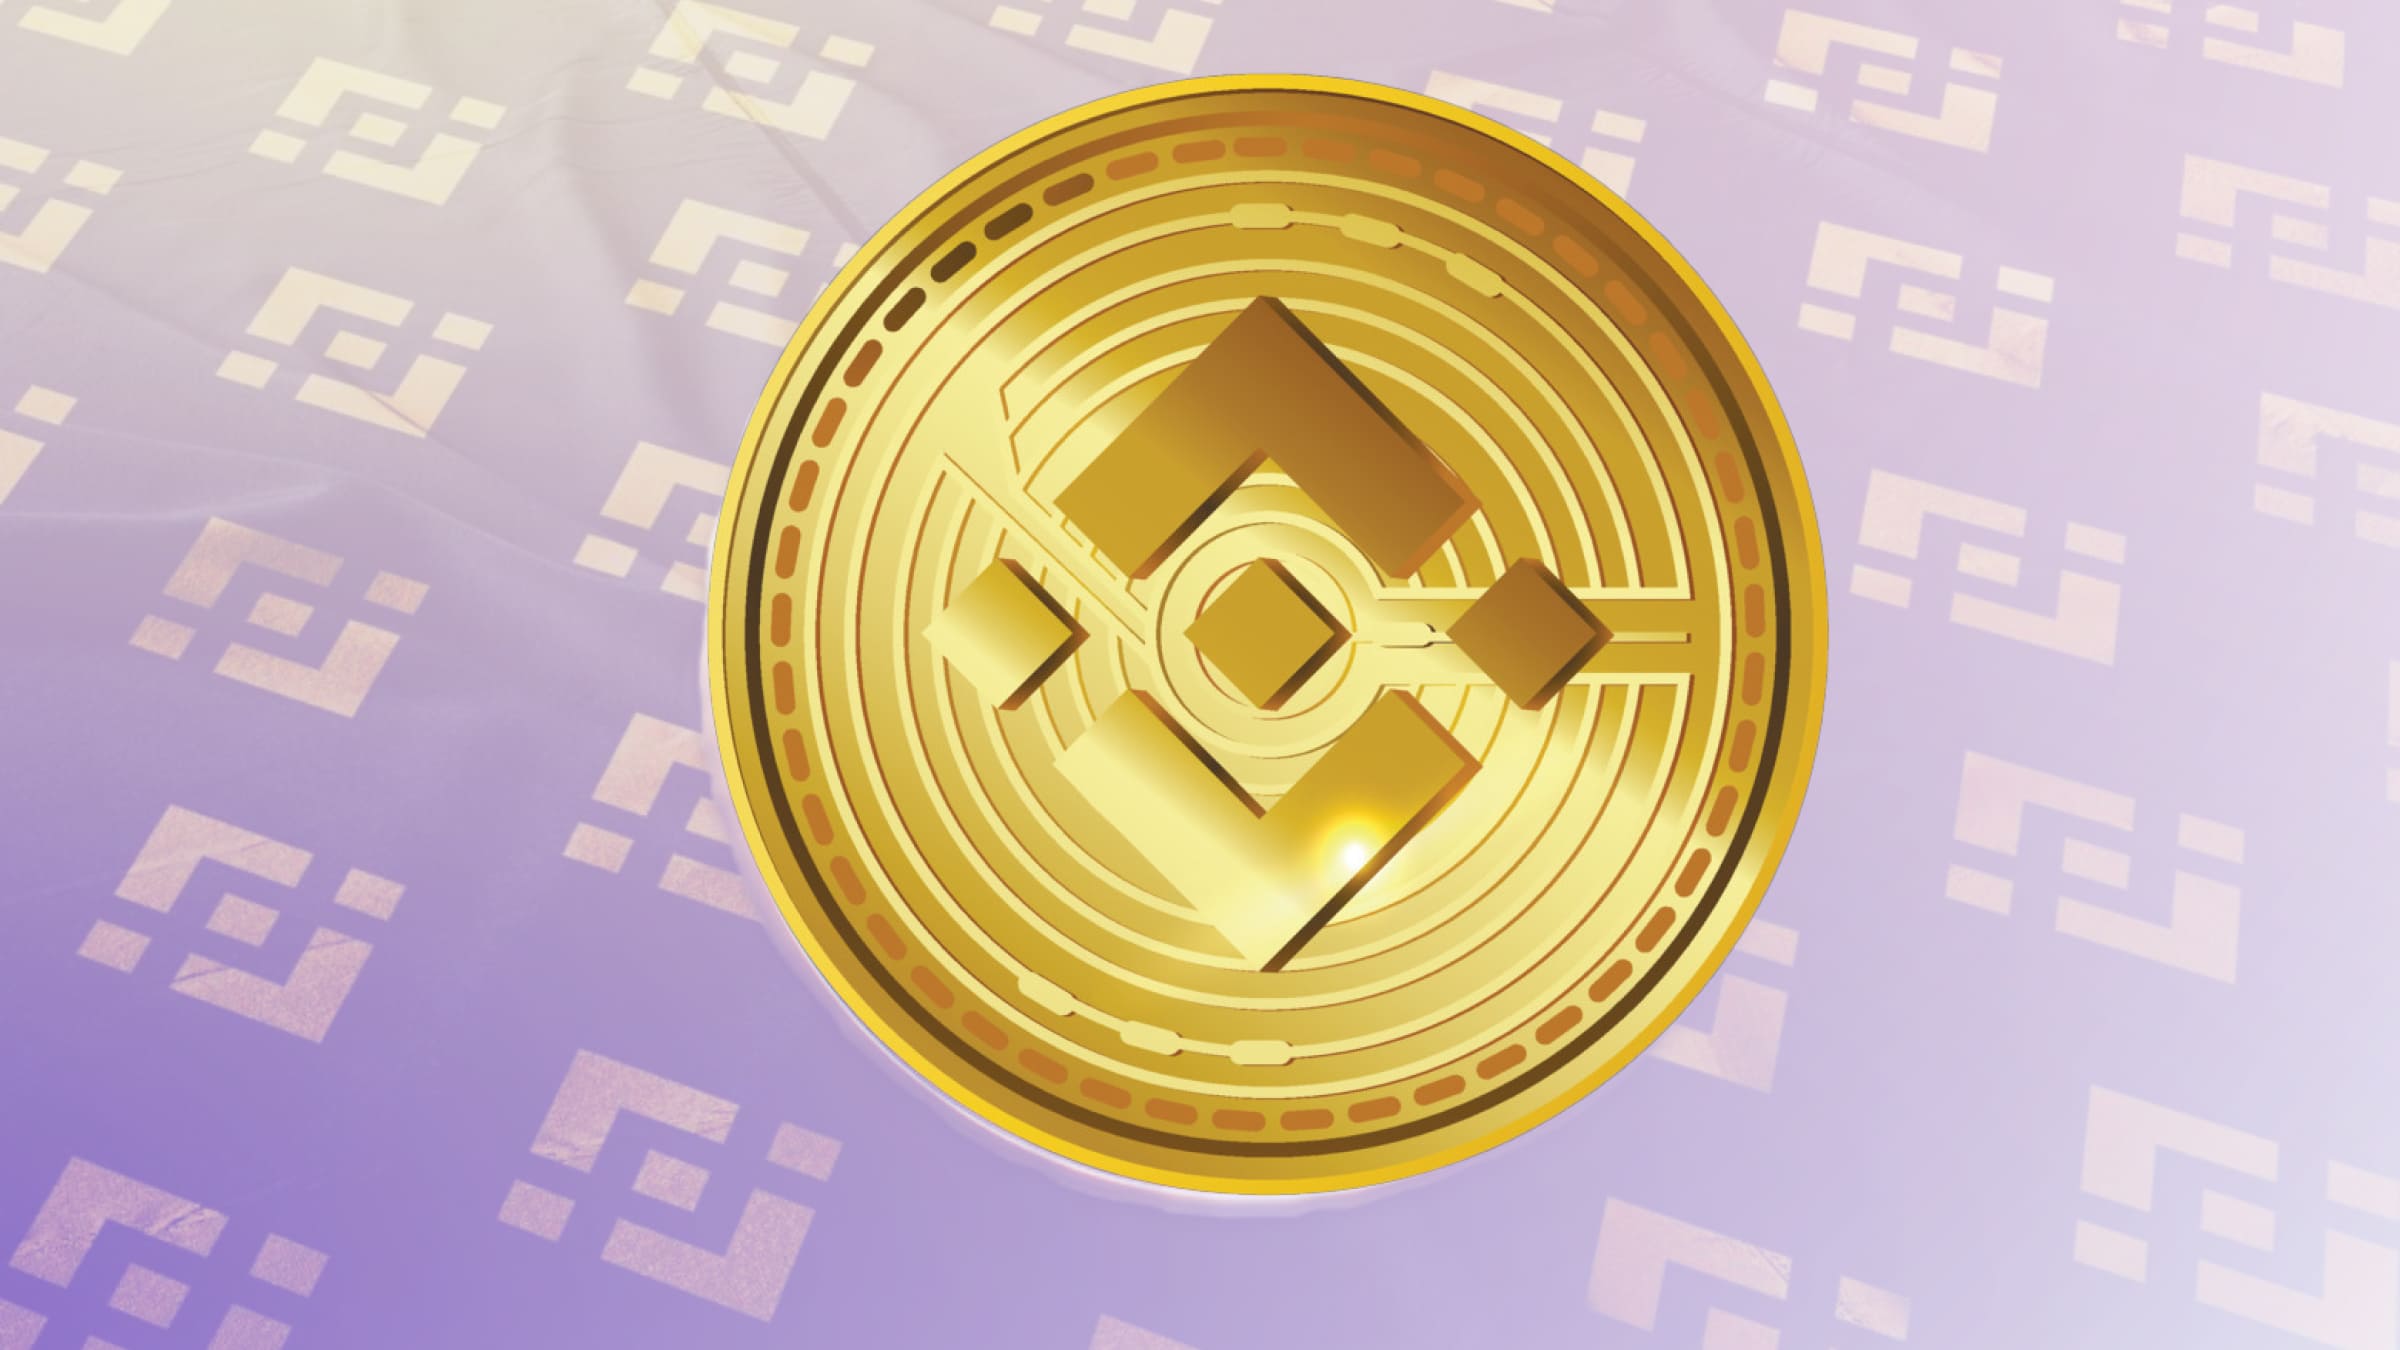 Binance's BNB runs on its own blockchain and is among the top 5 cryptocurrencies by capitalization.